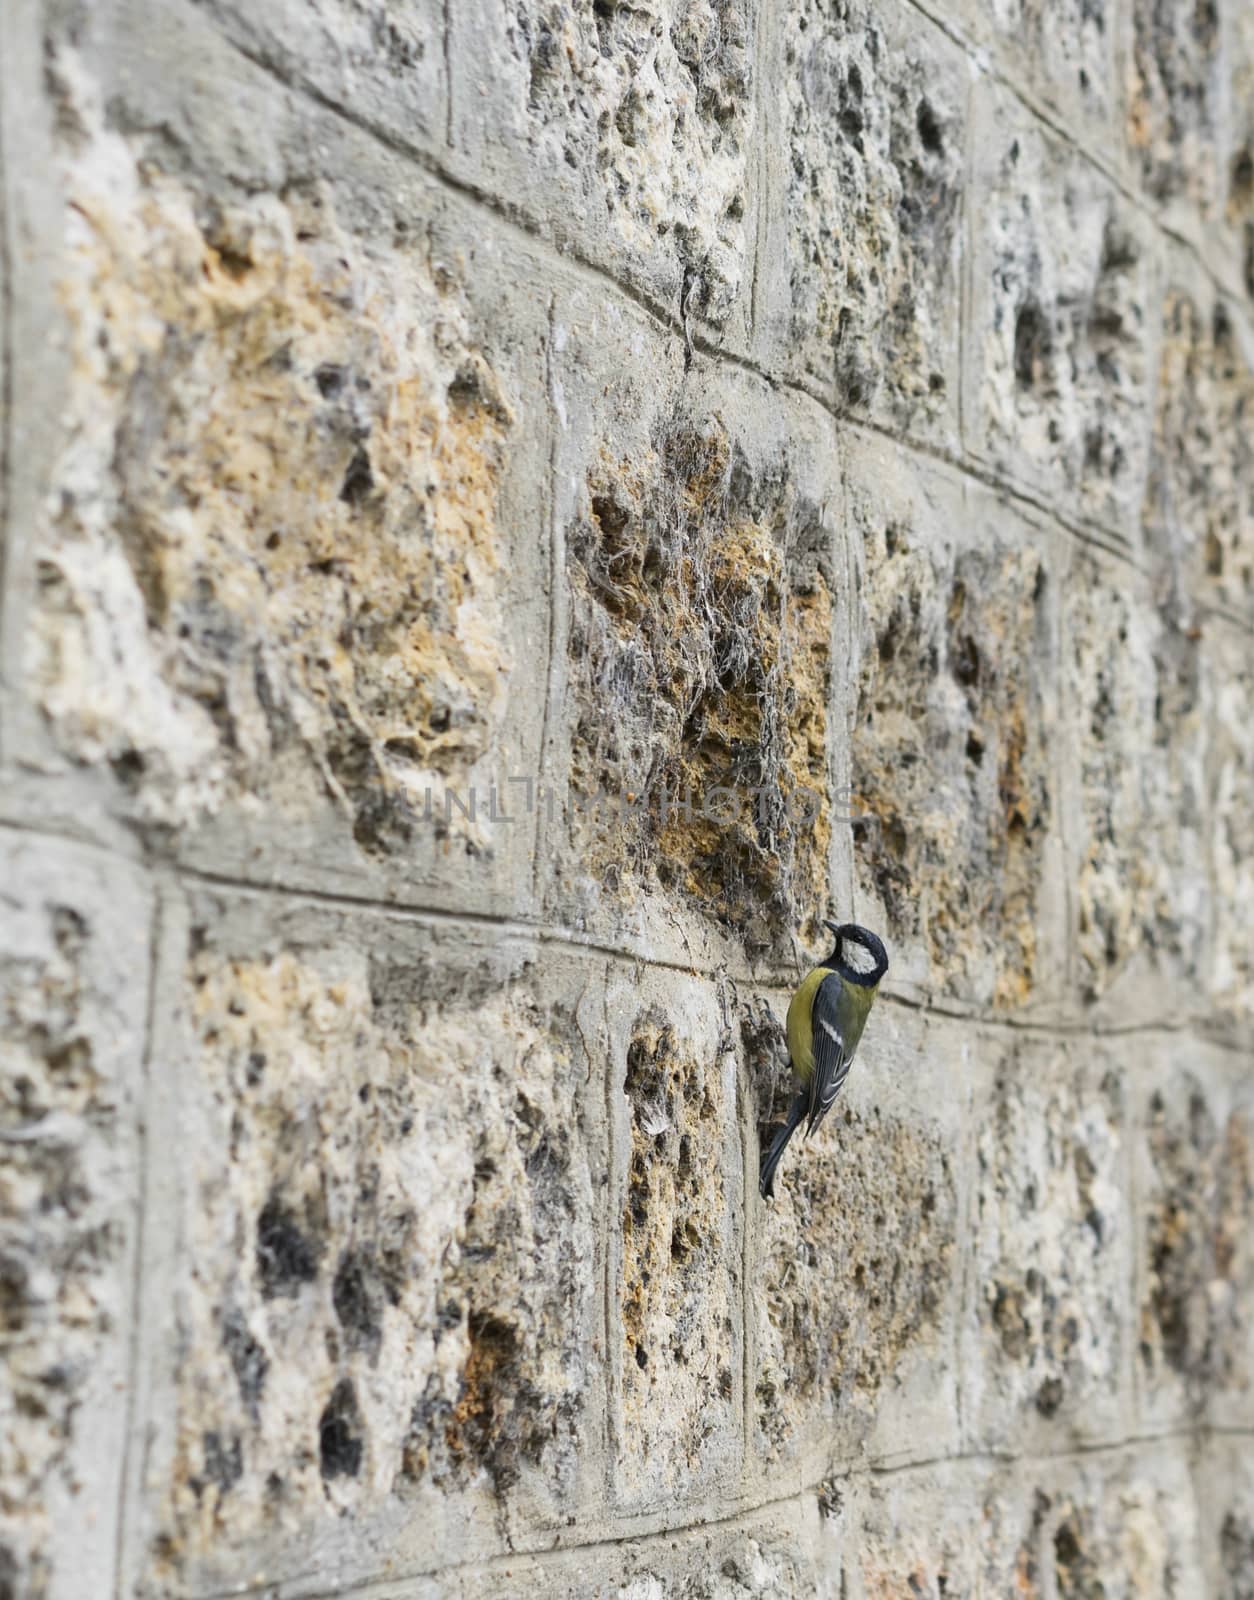 Textured background image of an old mossy stone brick wall with a small bird